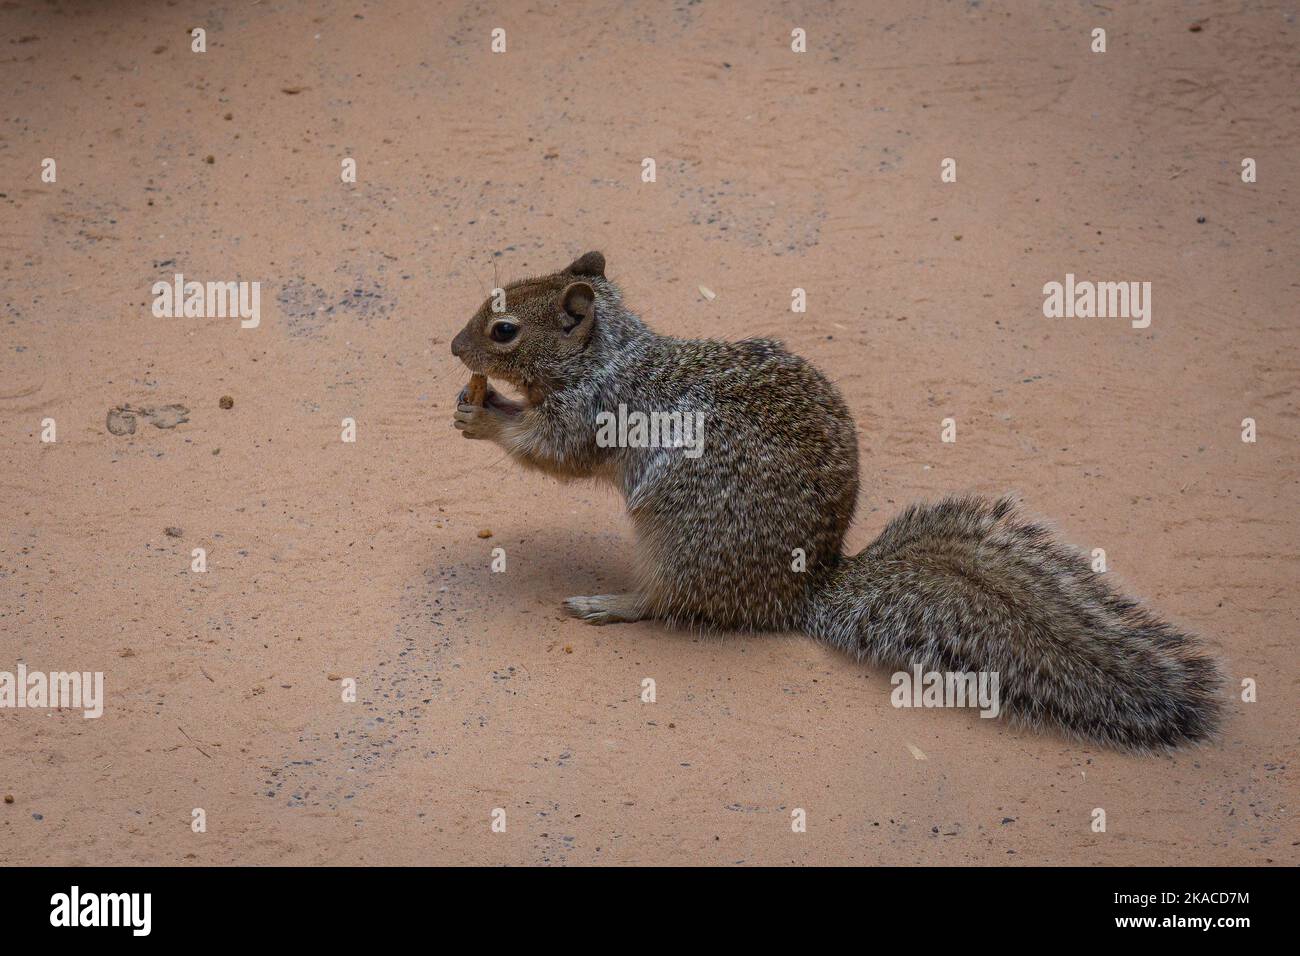 California ground squirrel or in Latin Spermophilus beecheyi is a rodent in the family Sciuridae, photographed in Zion National park Stock Photo